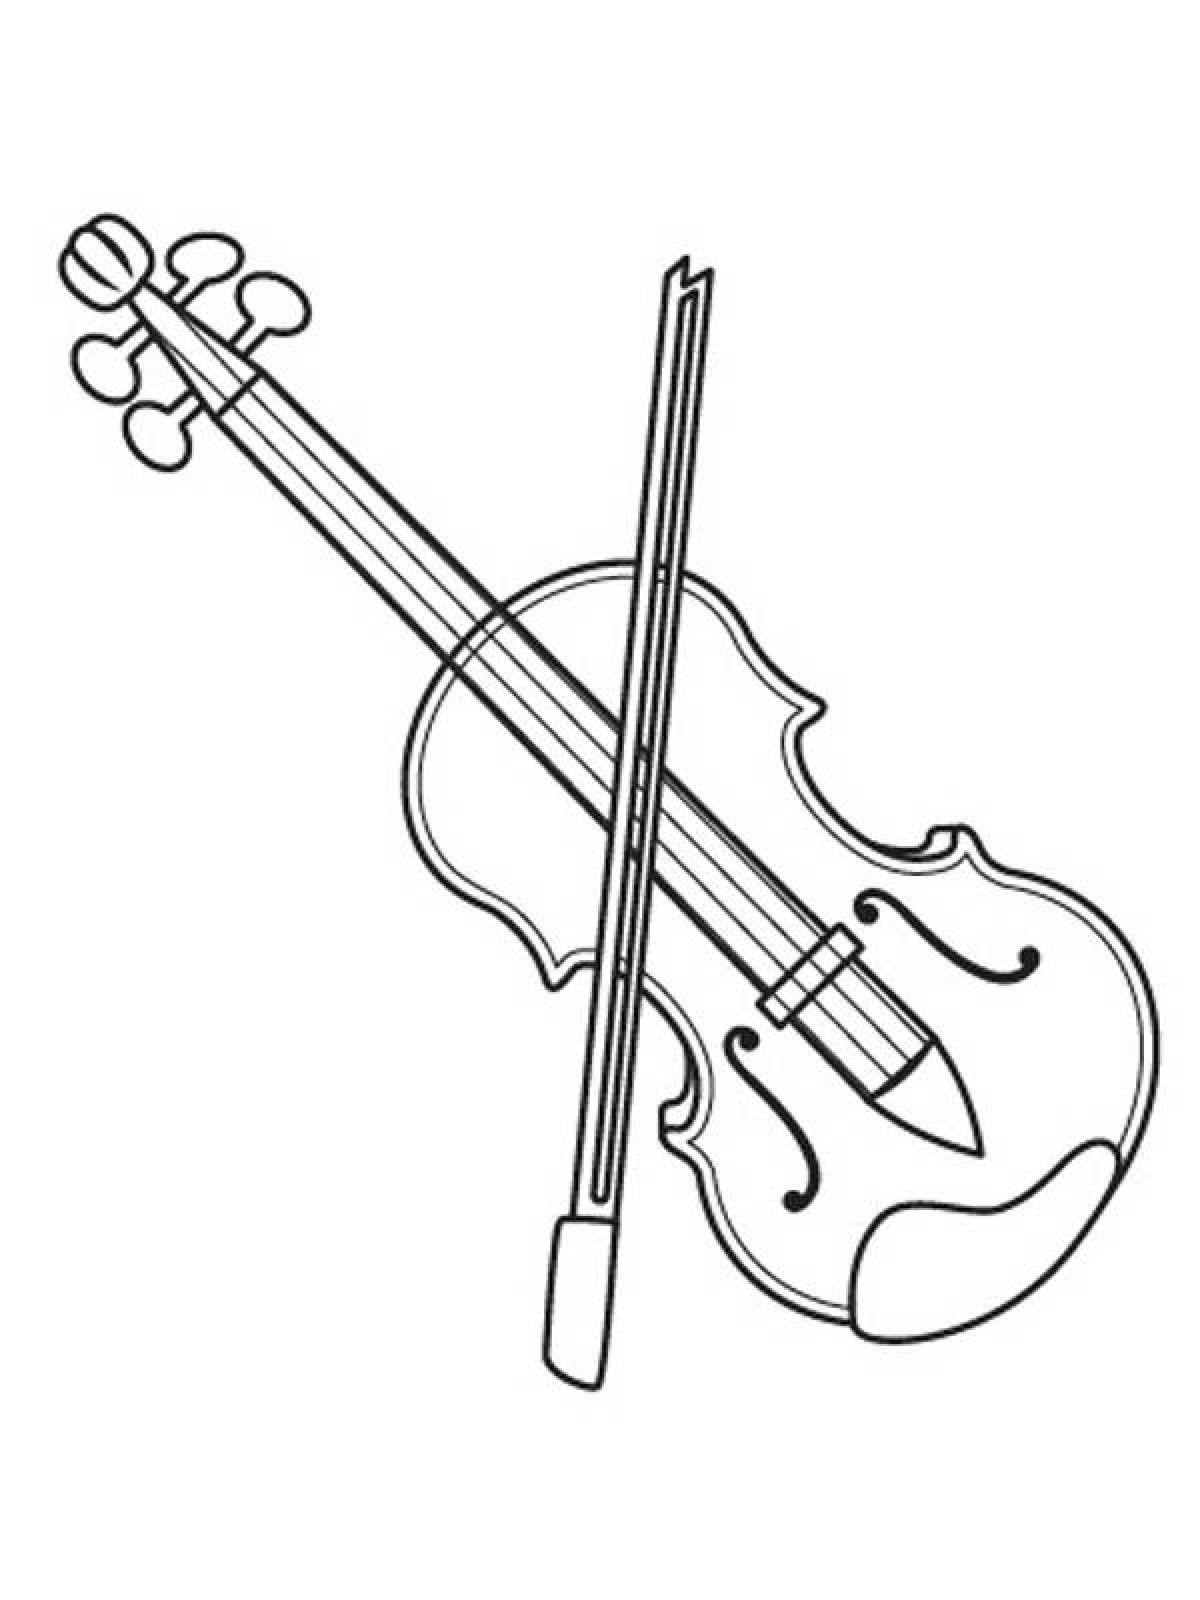 Playful violin coloring page